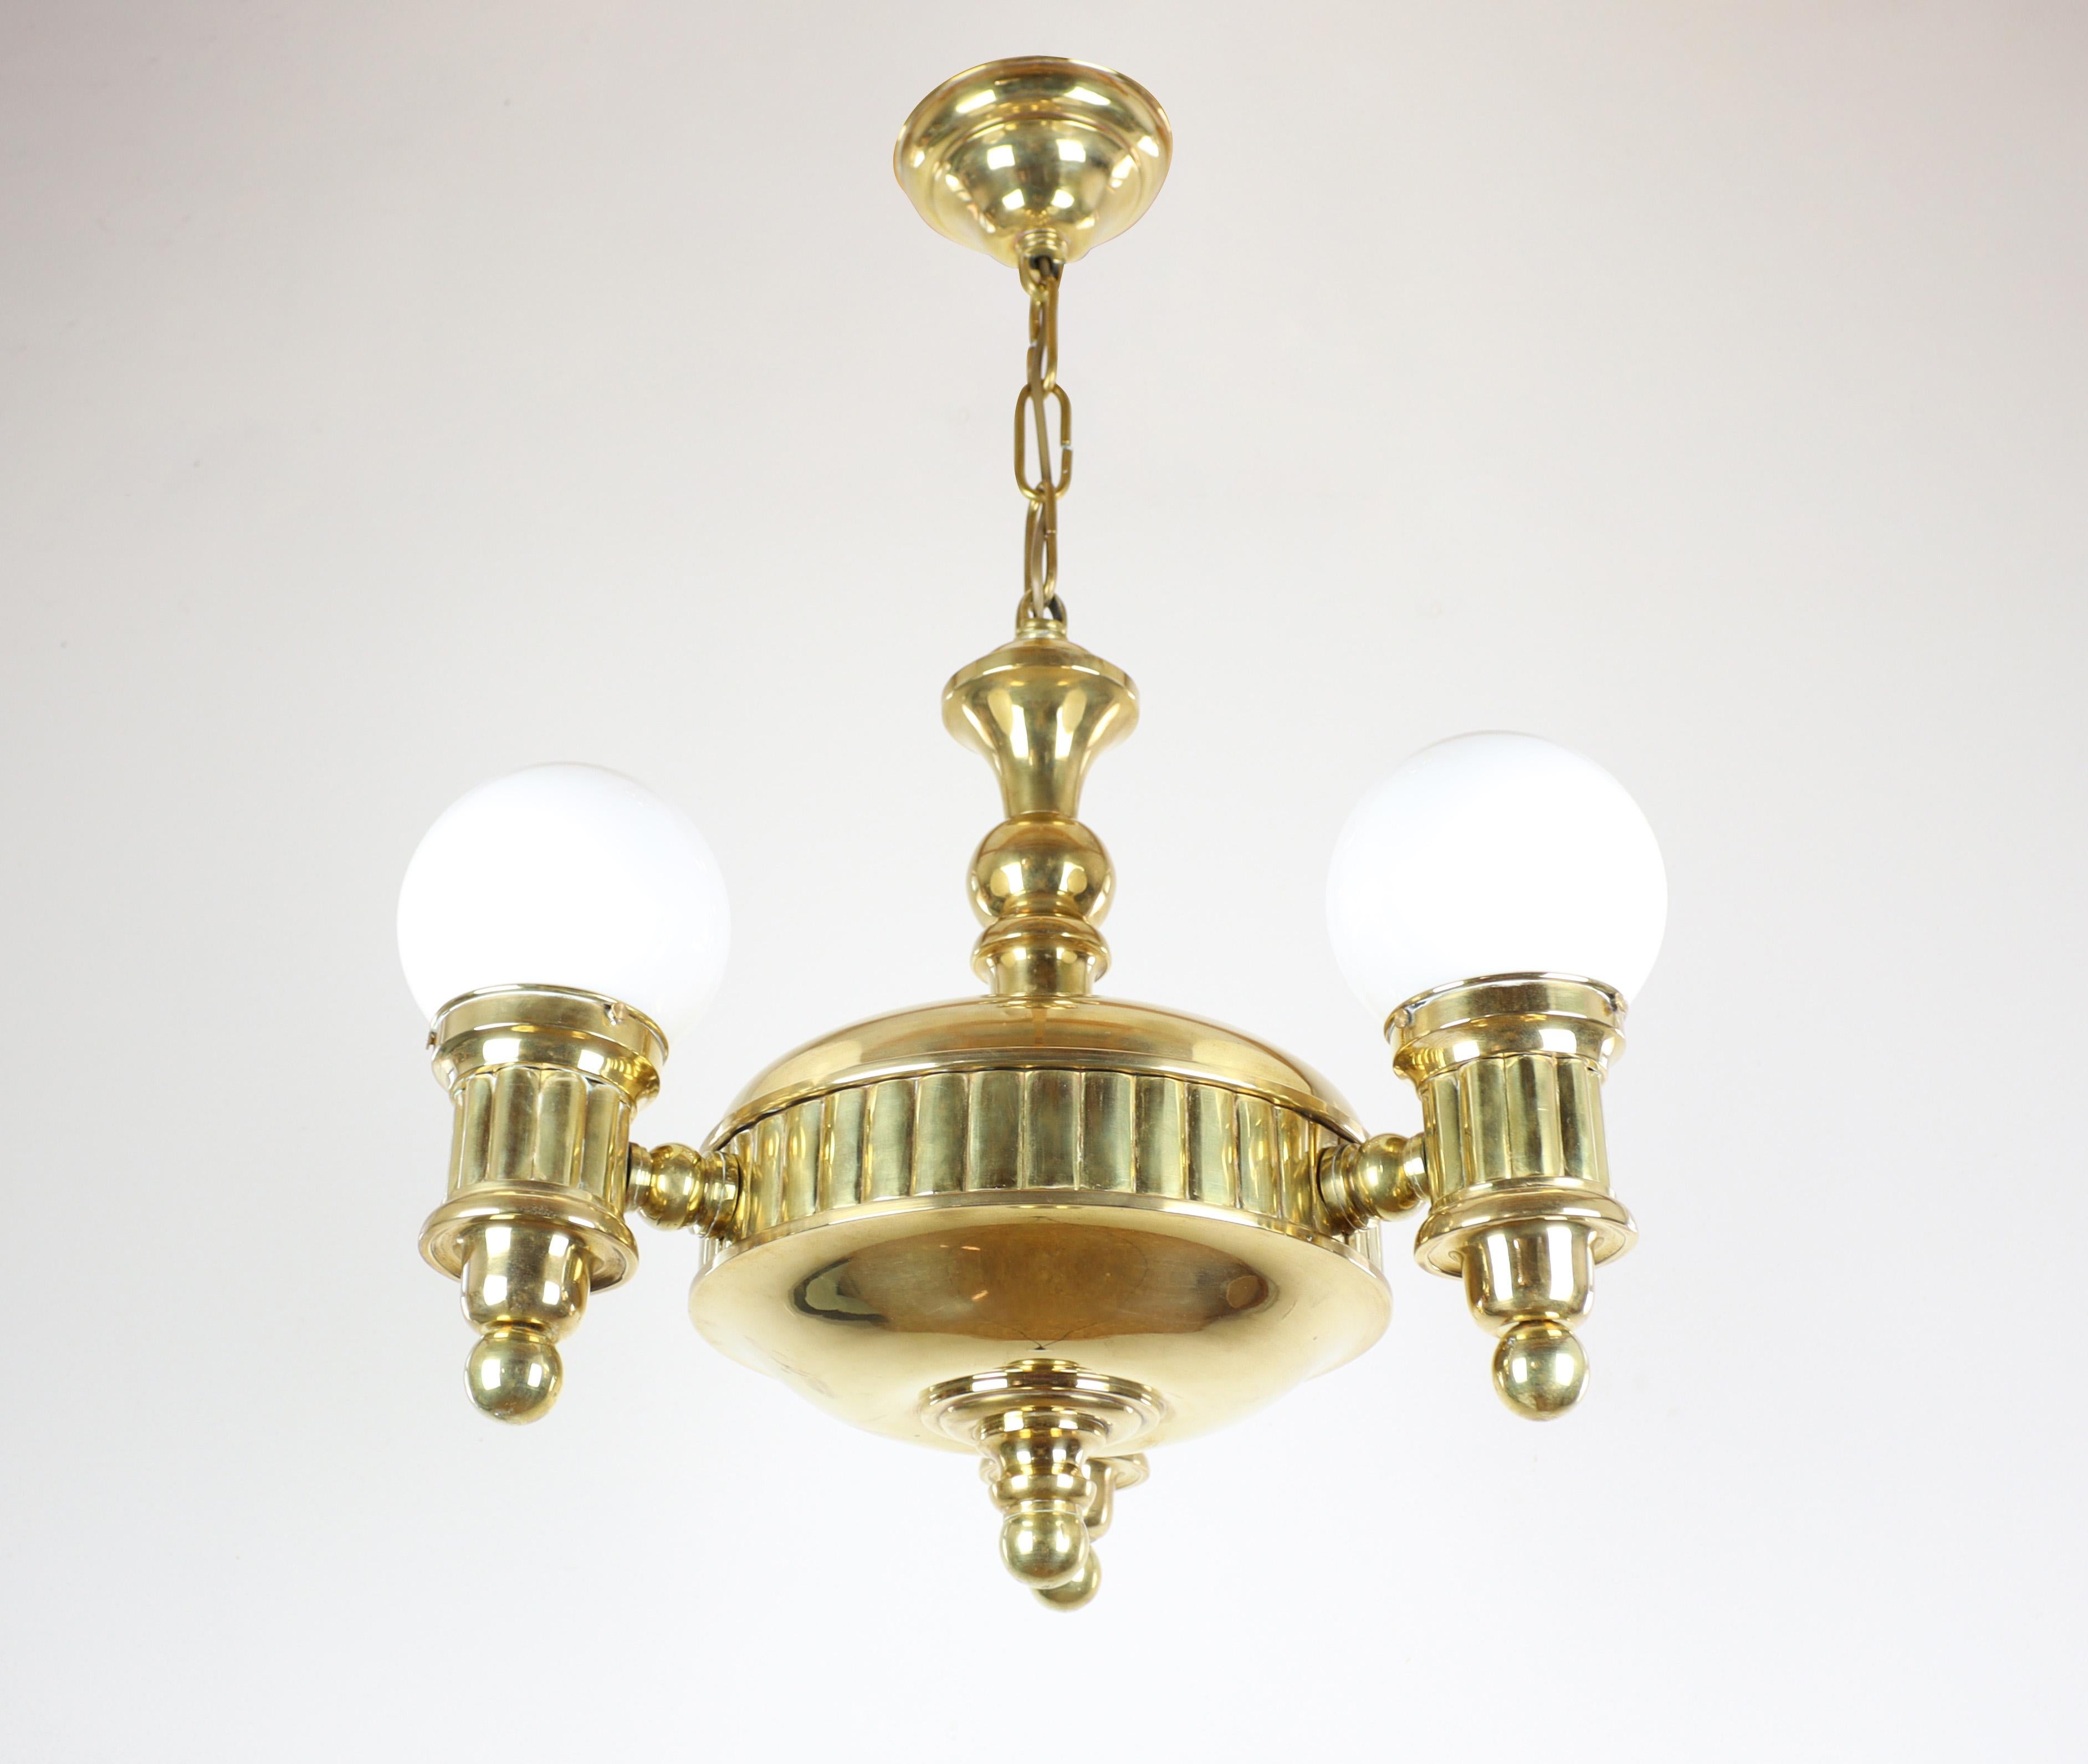 Czech Exclusive Art Deco Chandelier with Swivel Arms 'Three-Arm Design' For Sale